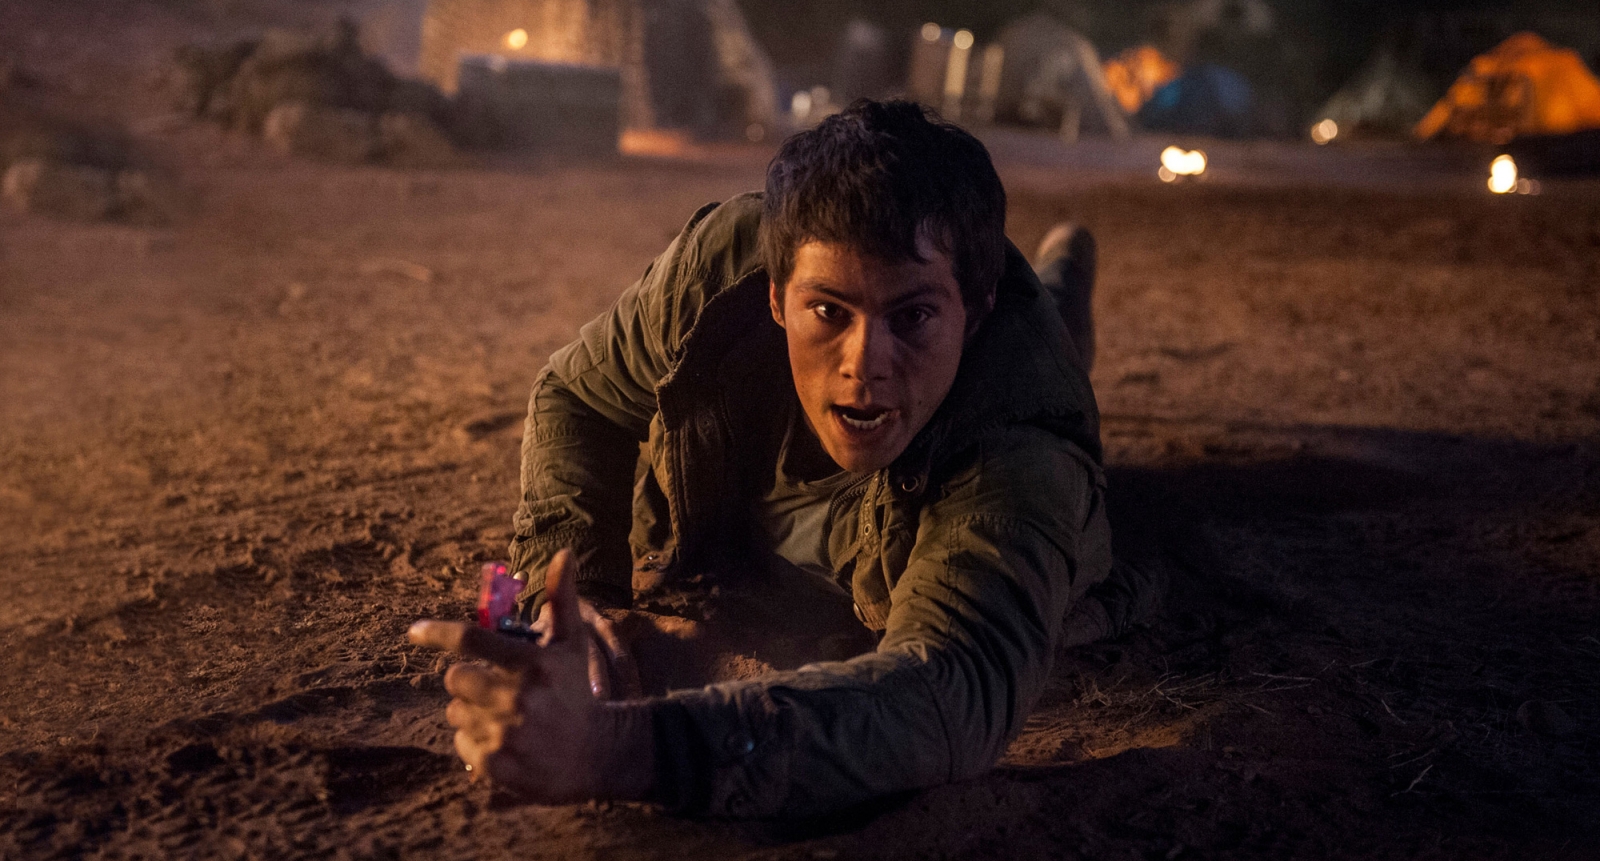 Maze Runner Sequel Delayed The Death Cure Pushed Back To